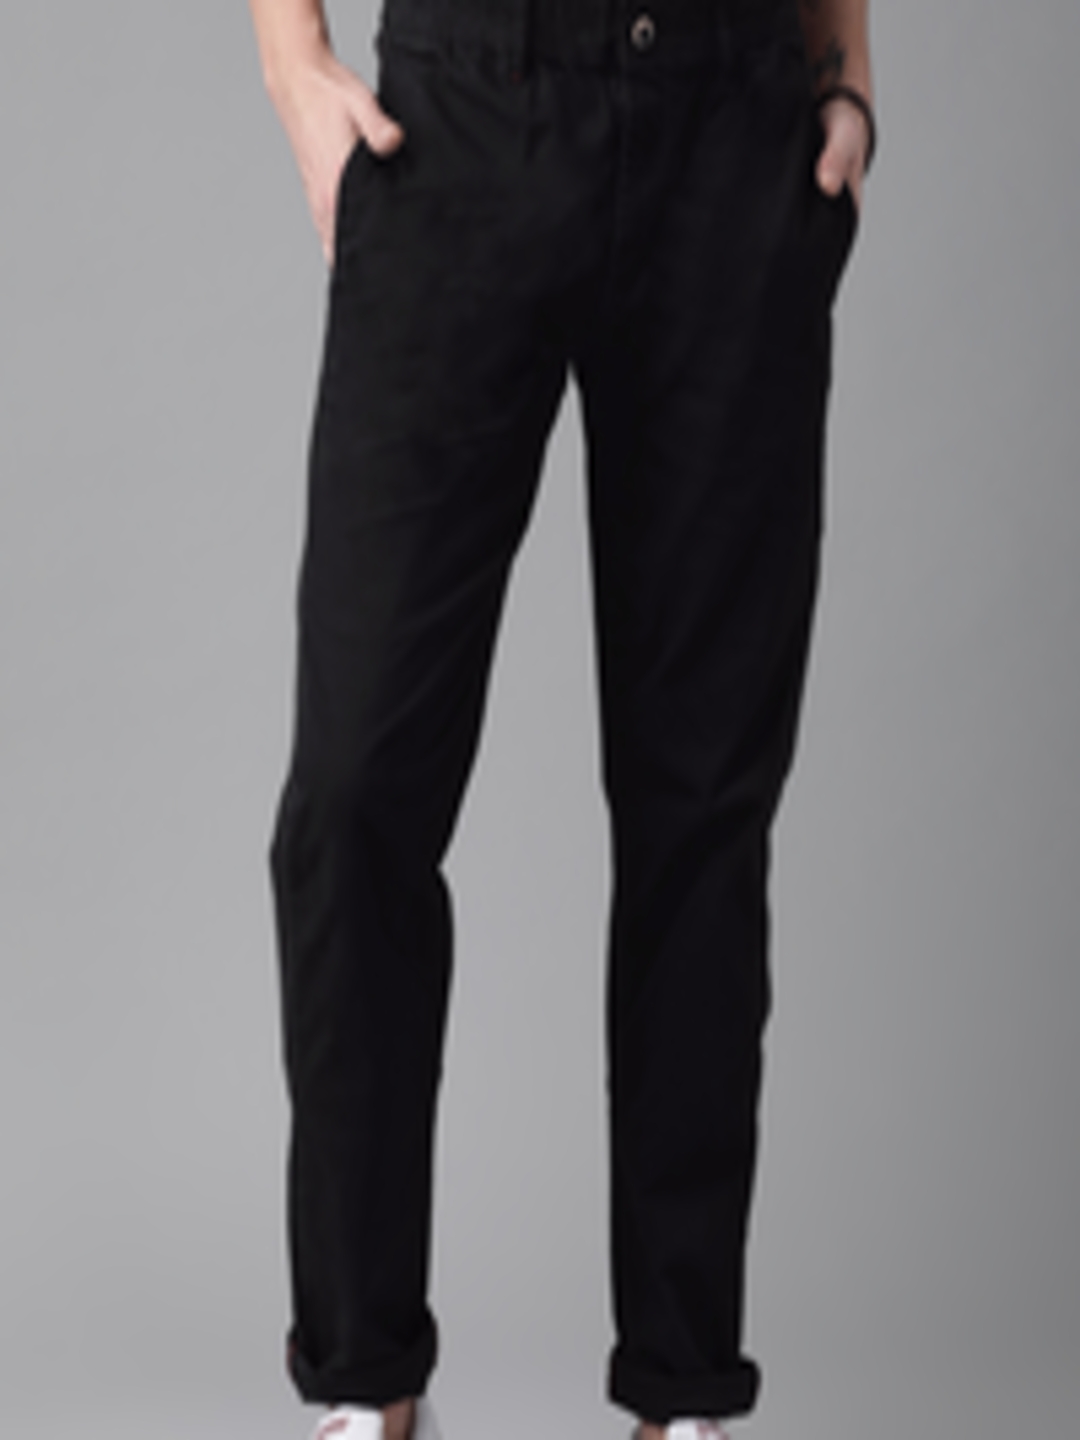 Buy The Roadster Lifestyle Co Men Black Slim Fit Solid Regular Trousers ...